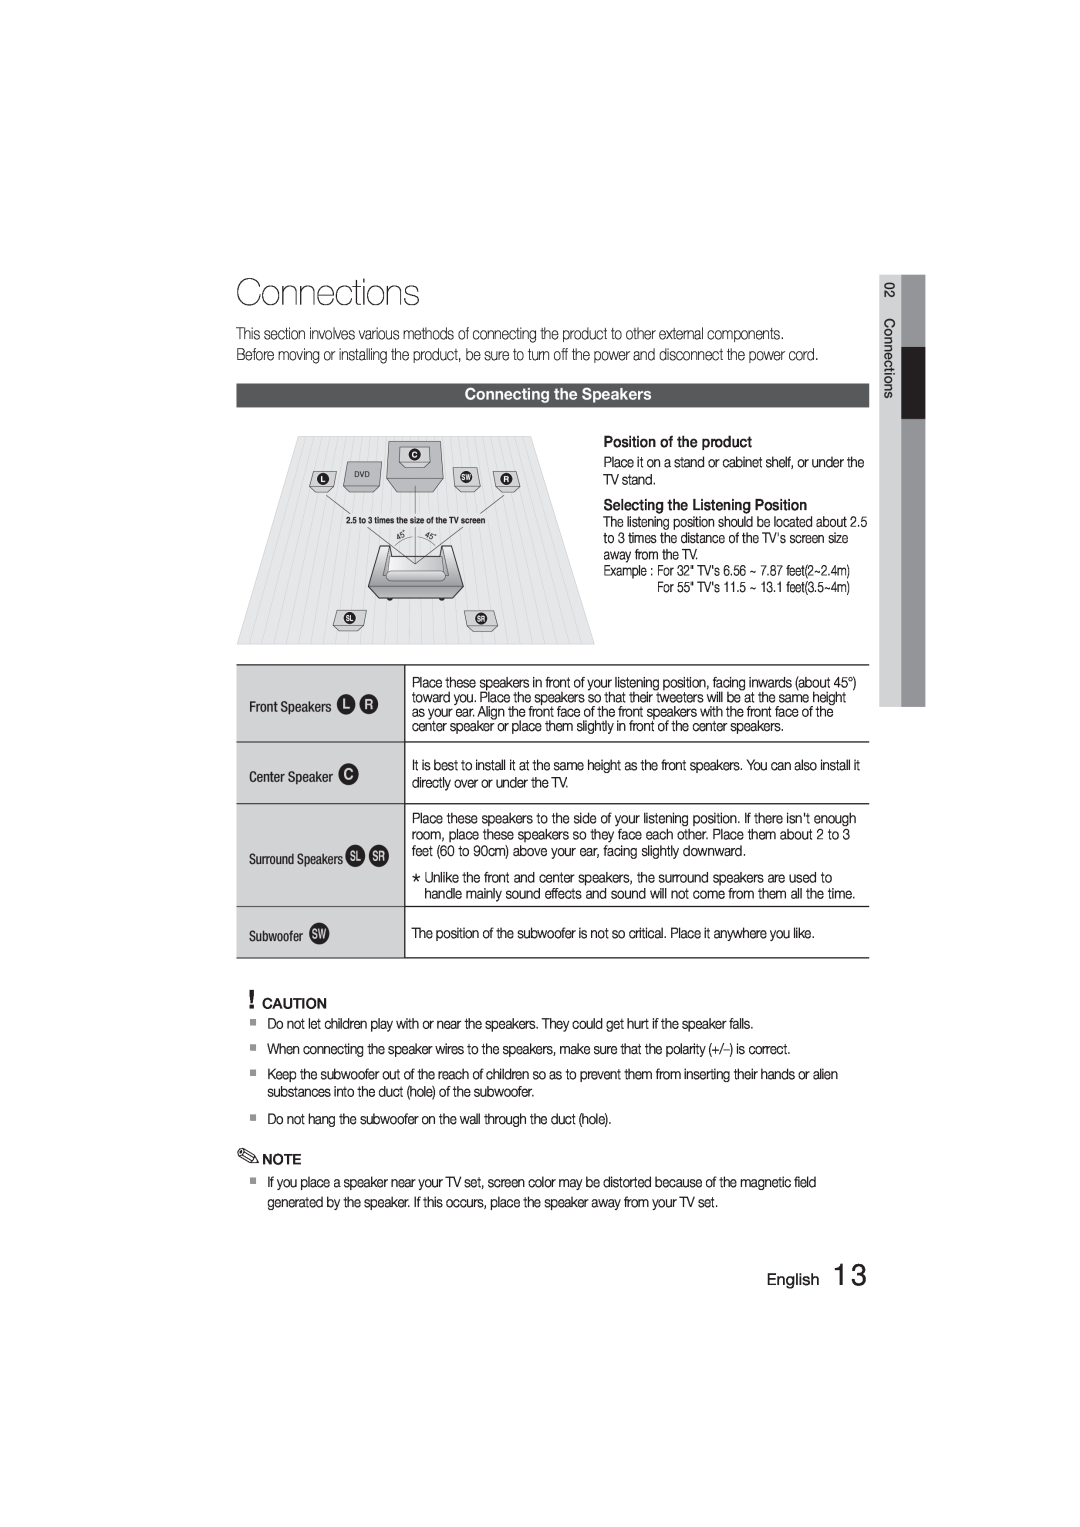 Samsung HT-355, HT-E350 user manual Connections, Connecting the Speakers, English 